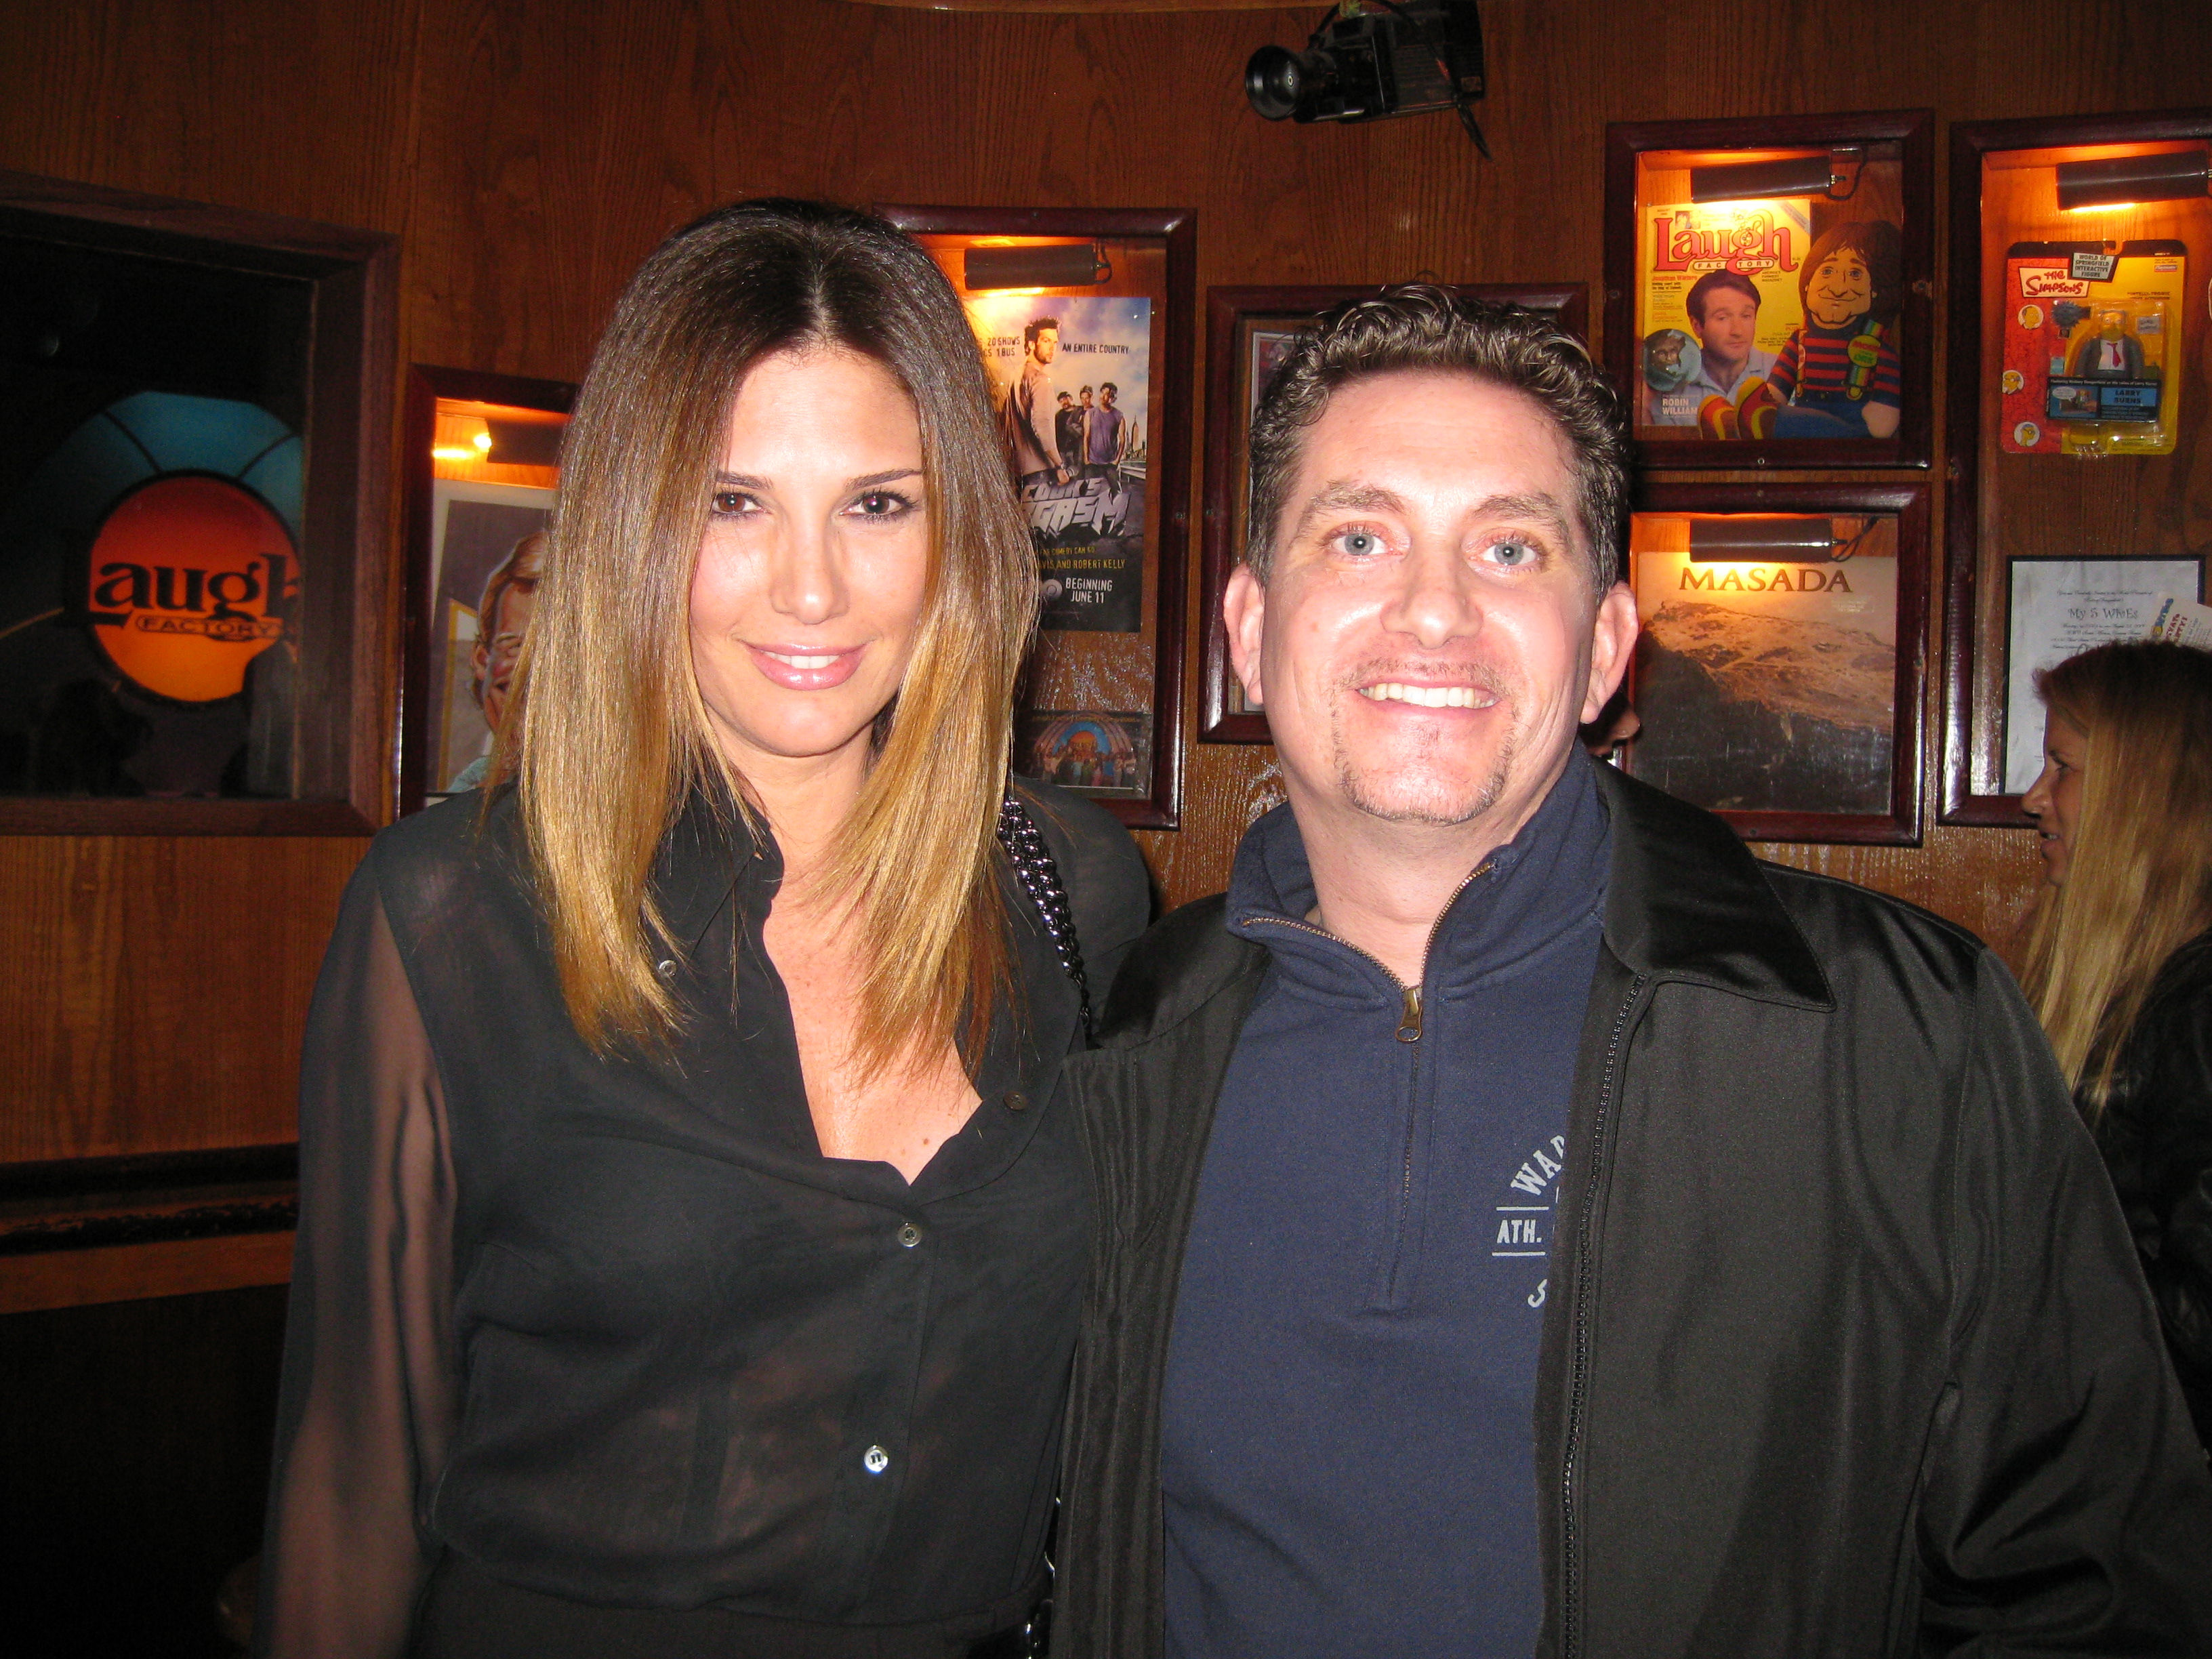 Daisy Fuentes and Michael Christaldi at The Laugh Factory Comedy Club in Hollywood 11/16/12